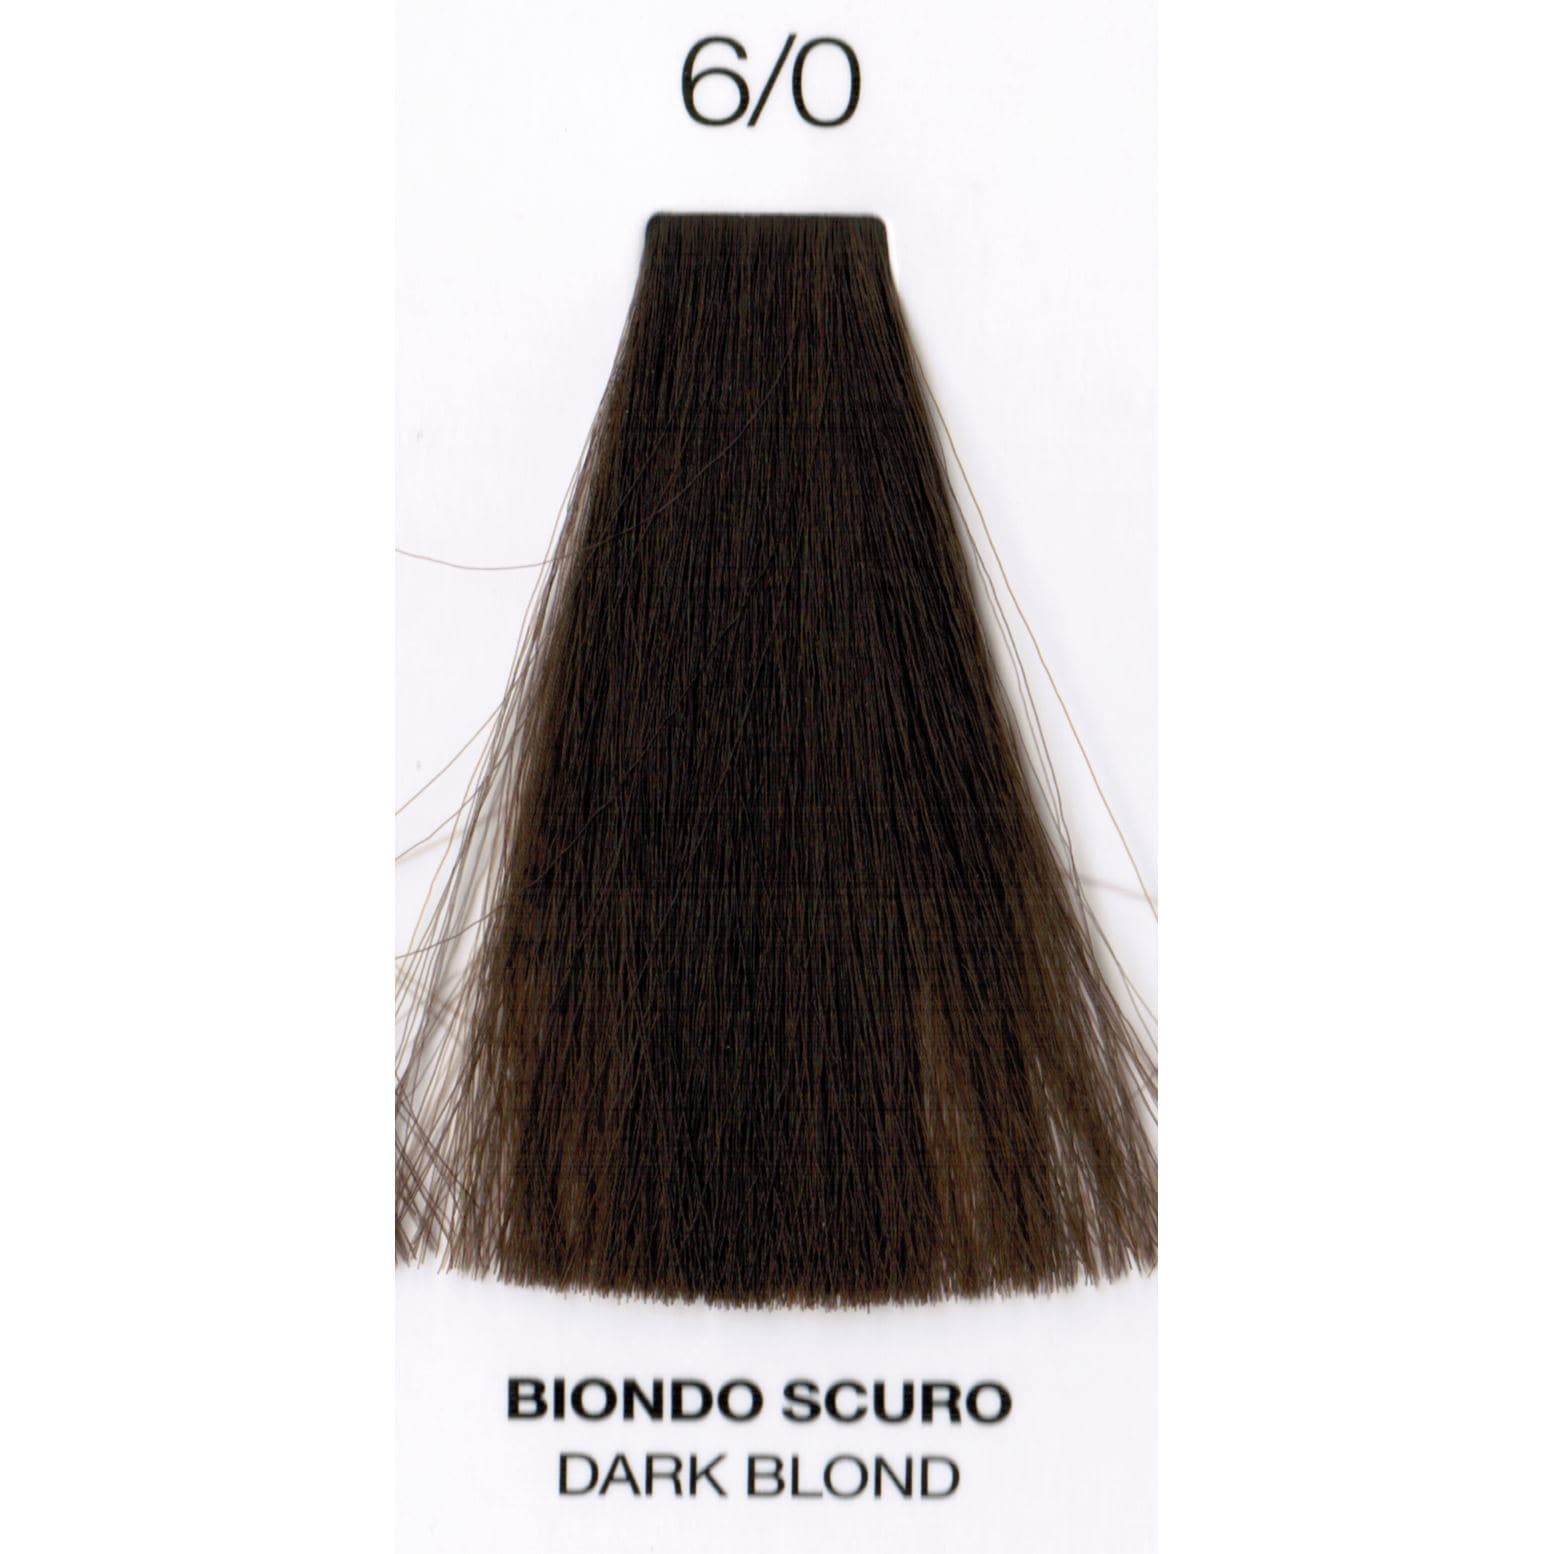 6/0 Dark Blonde | Purity | Ammonia-Free Permanent Hair Color HAIR COLOR OYSTER 